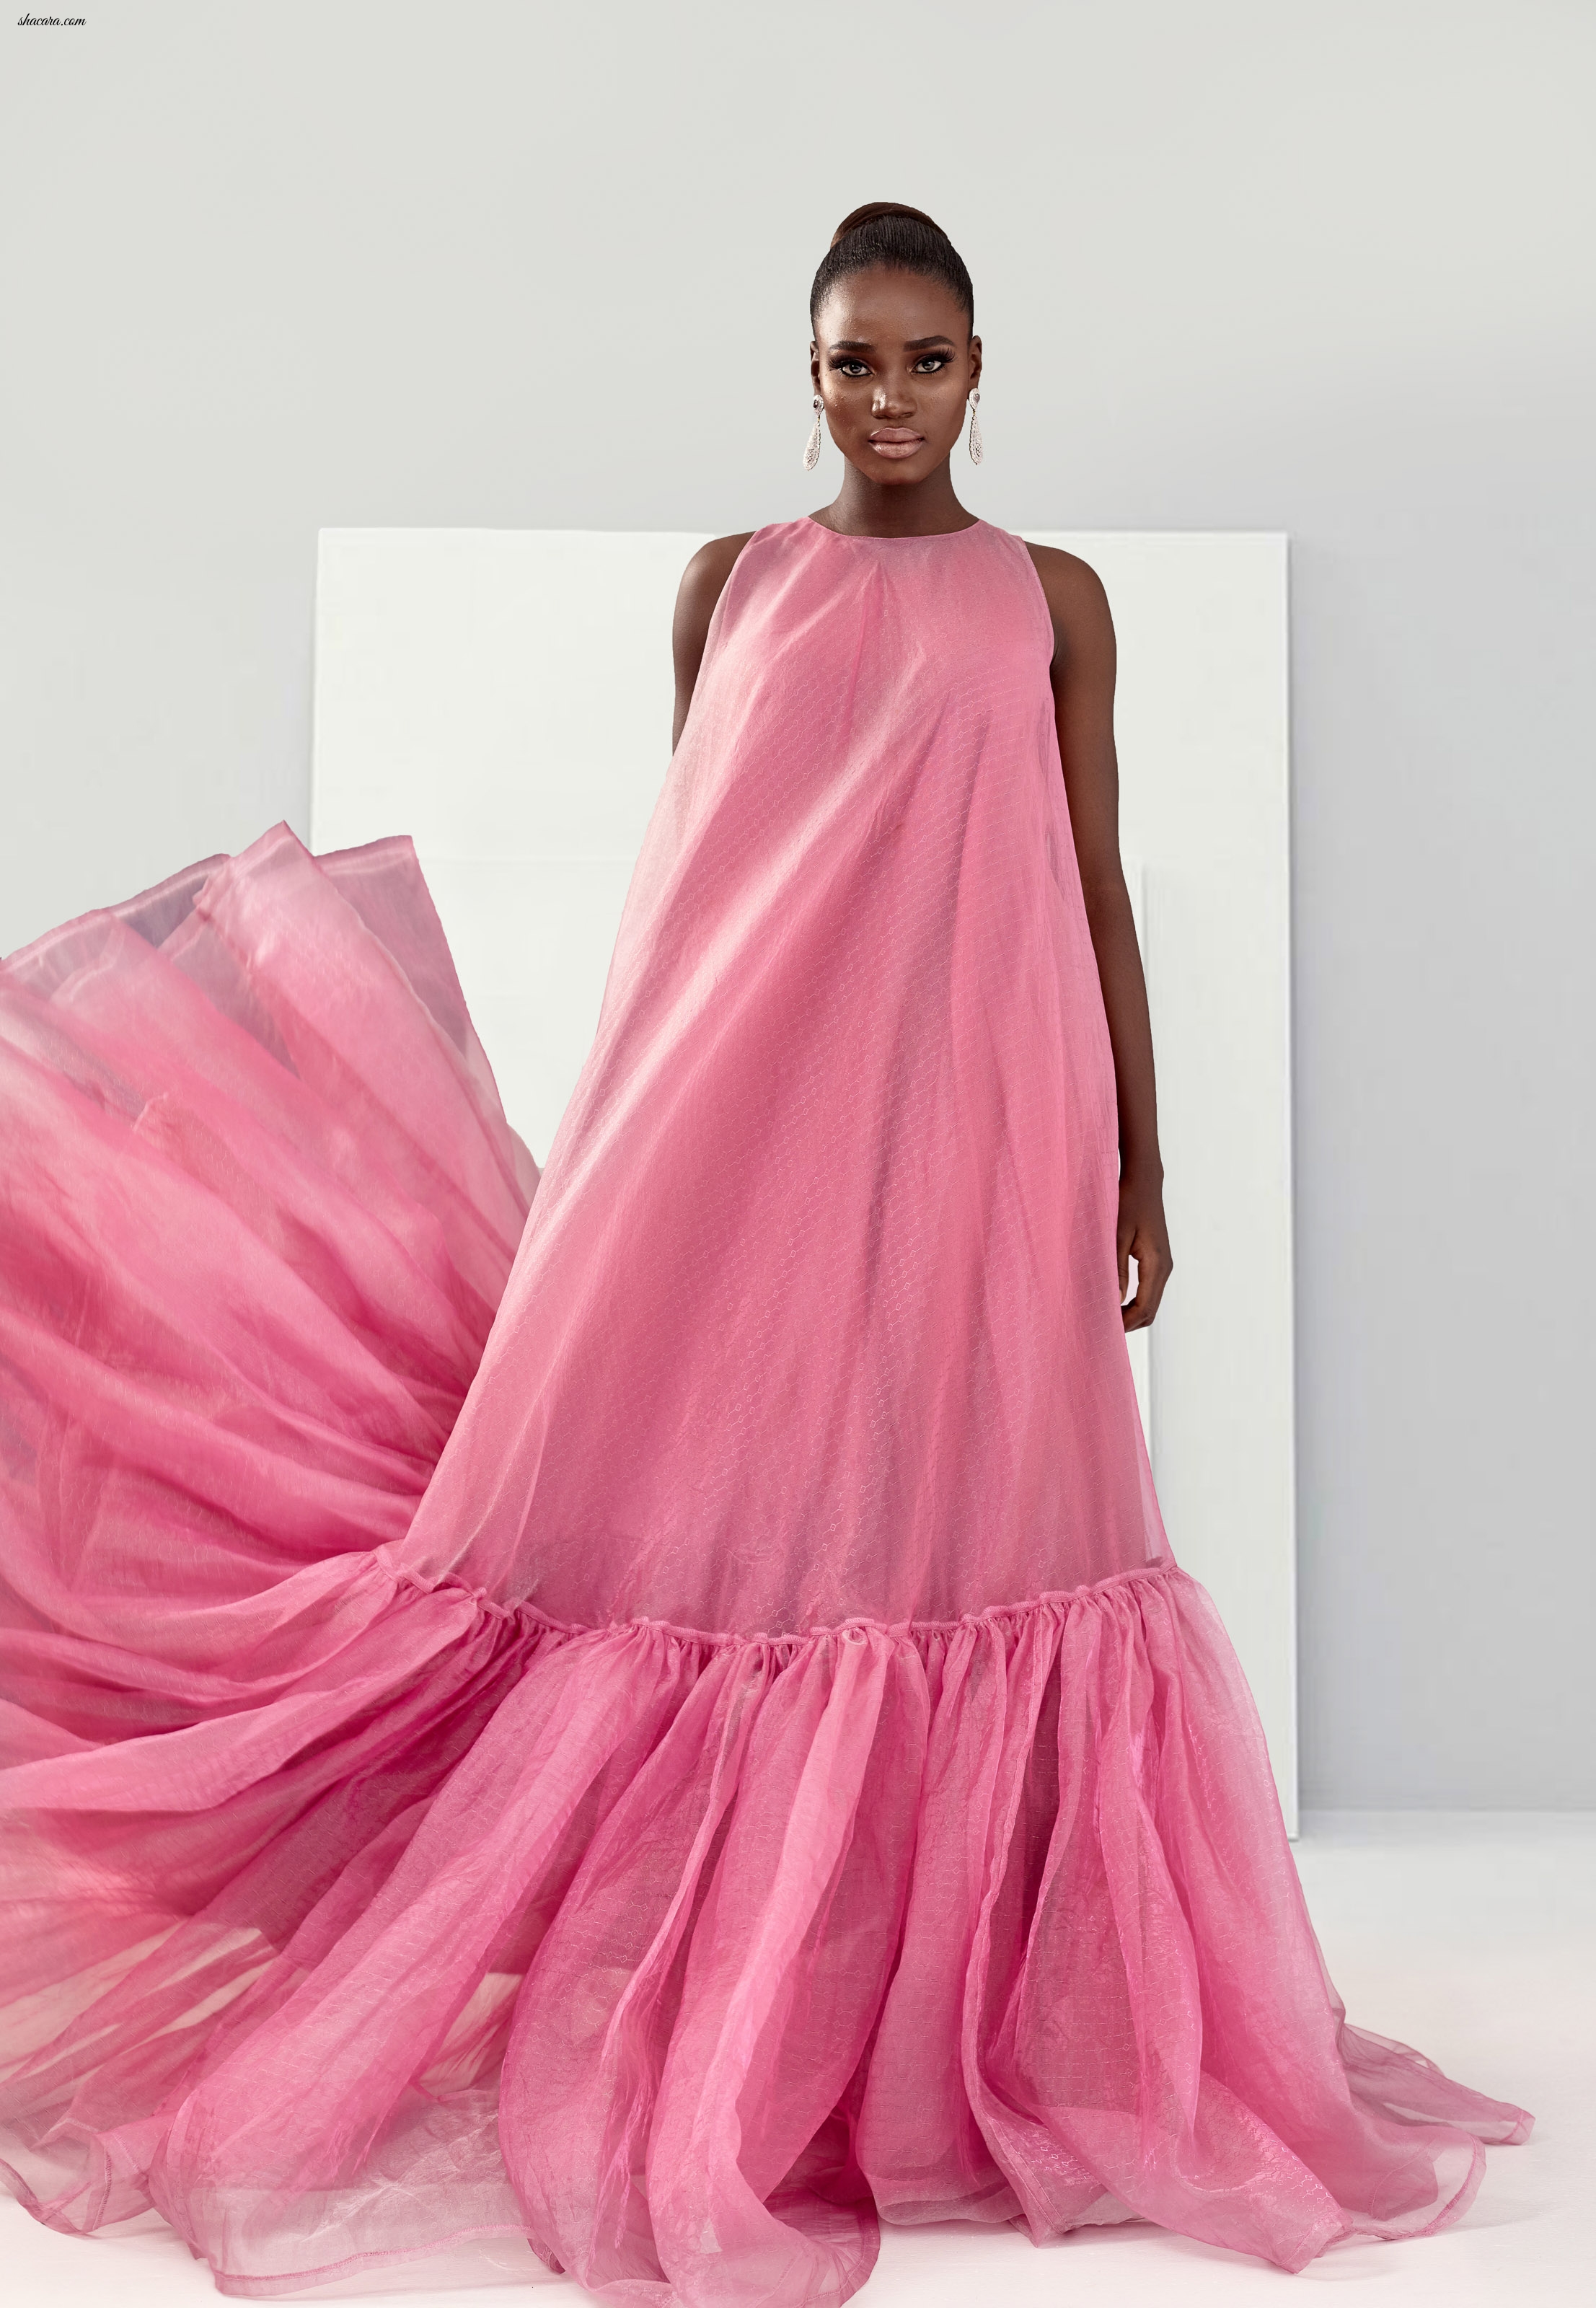 Glamorous, Understated & Classy! Nouva Couture Unveils SS19 Collection Tagged “Undone Glamour”